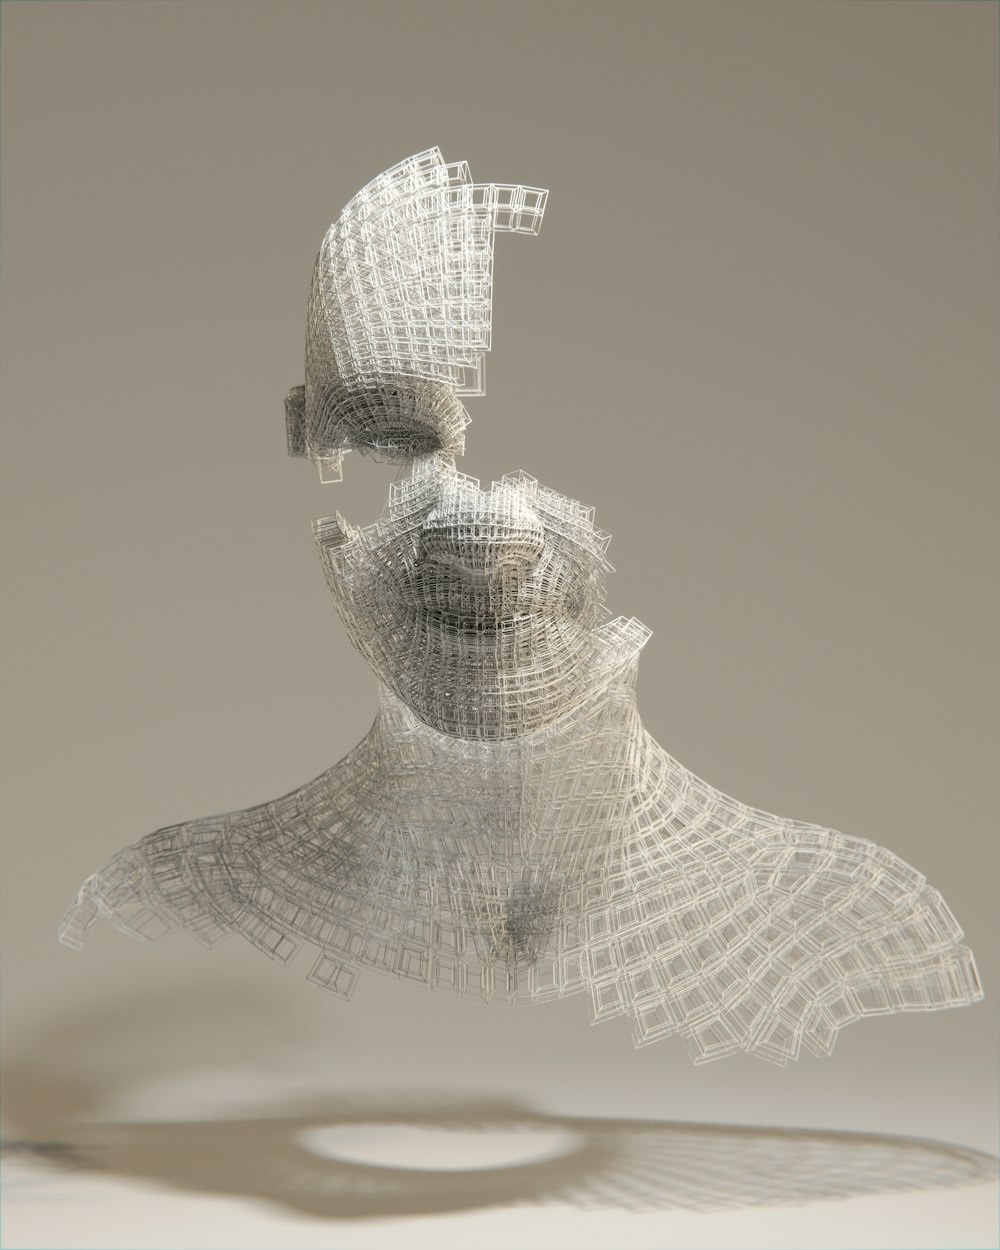 a computer generated image of a woman's head